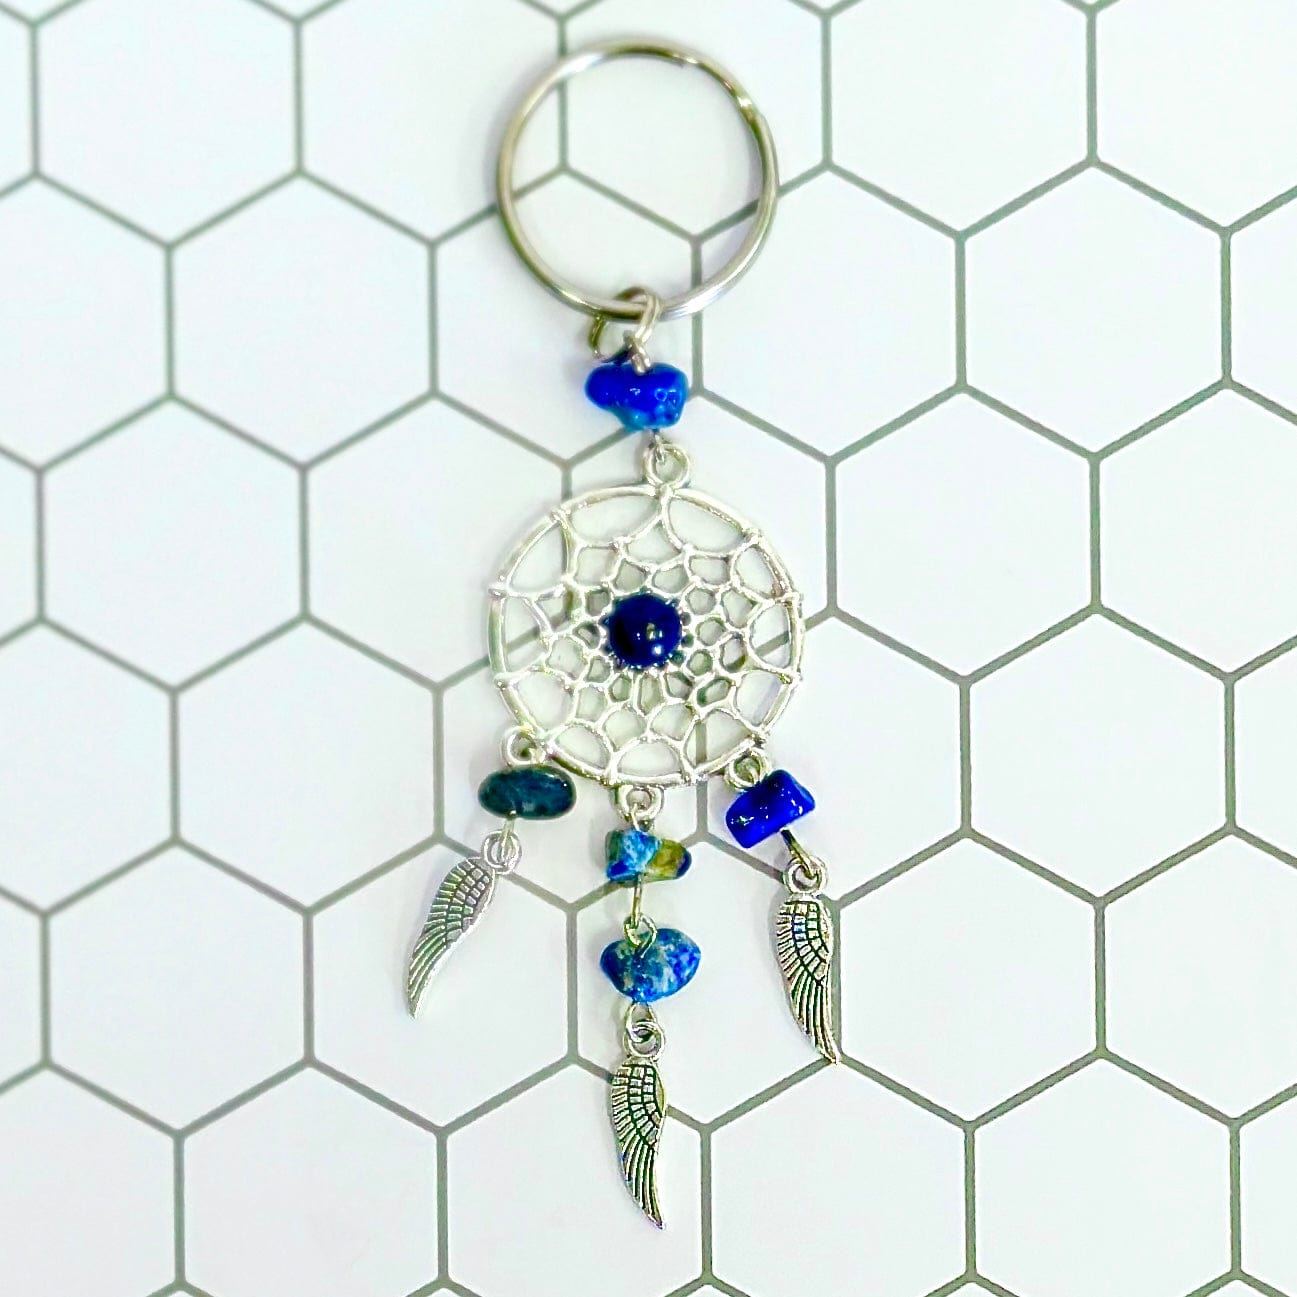 soulvalleytribe Bohemian Dream Catcher Silver Key Ring with Natural Gemstones Keyring